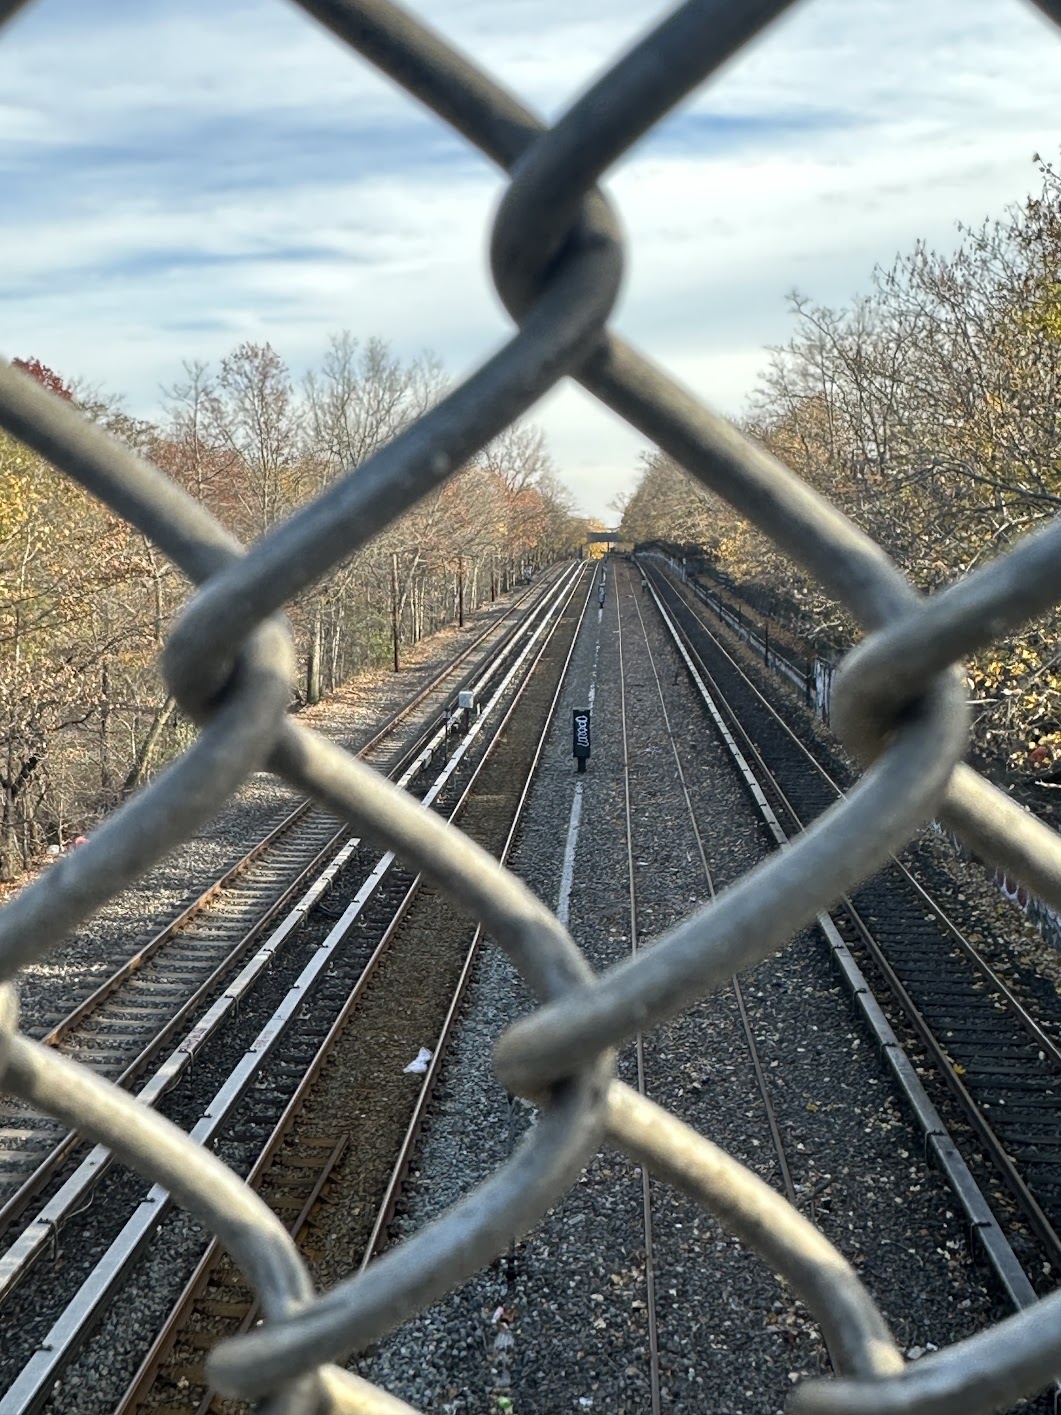 The Interborough Express tracks alongside the N-train route.